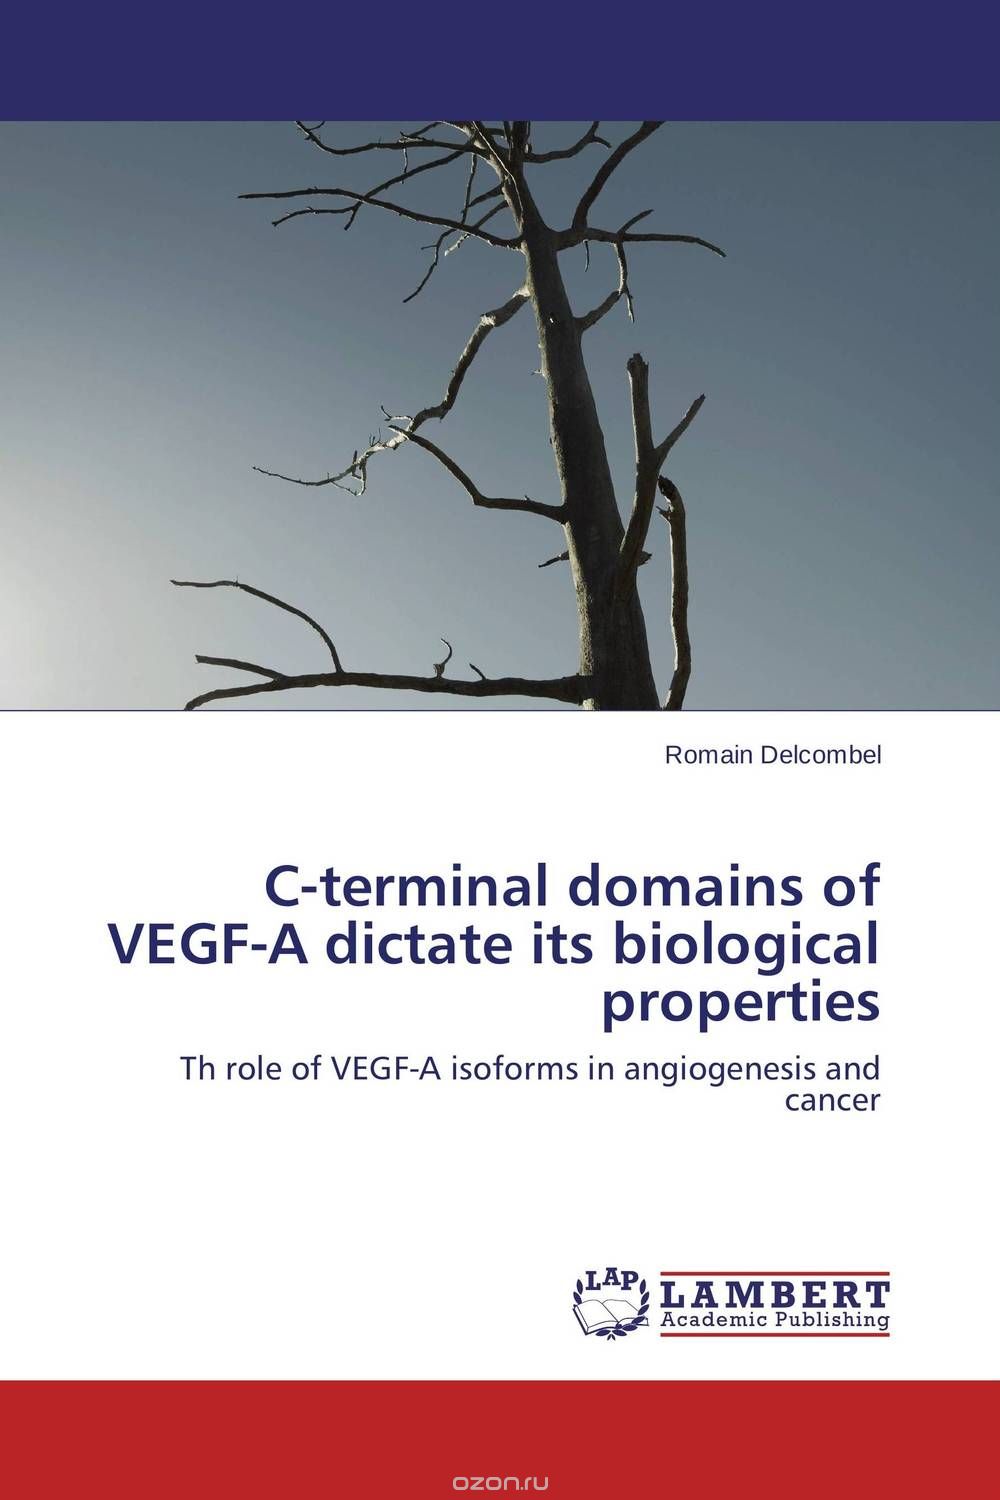 C-terminal domains of VEGF-A dictate its biological properties